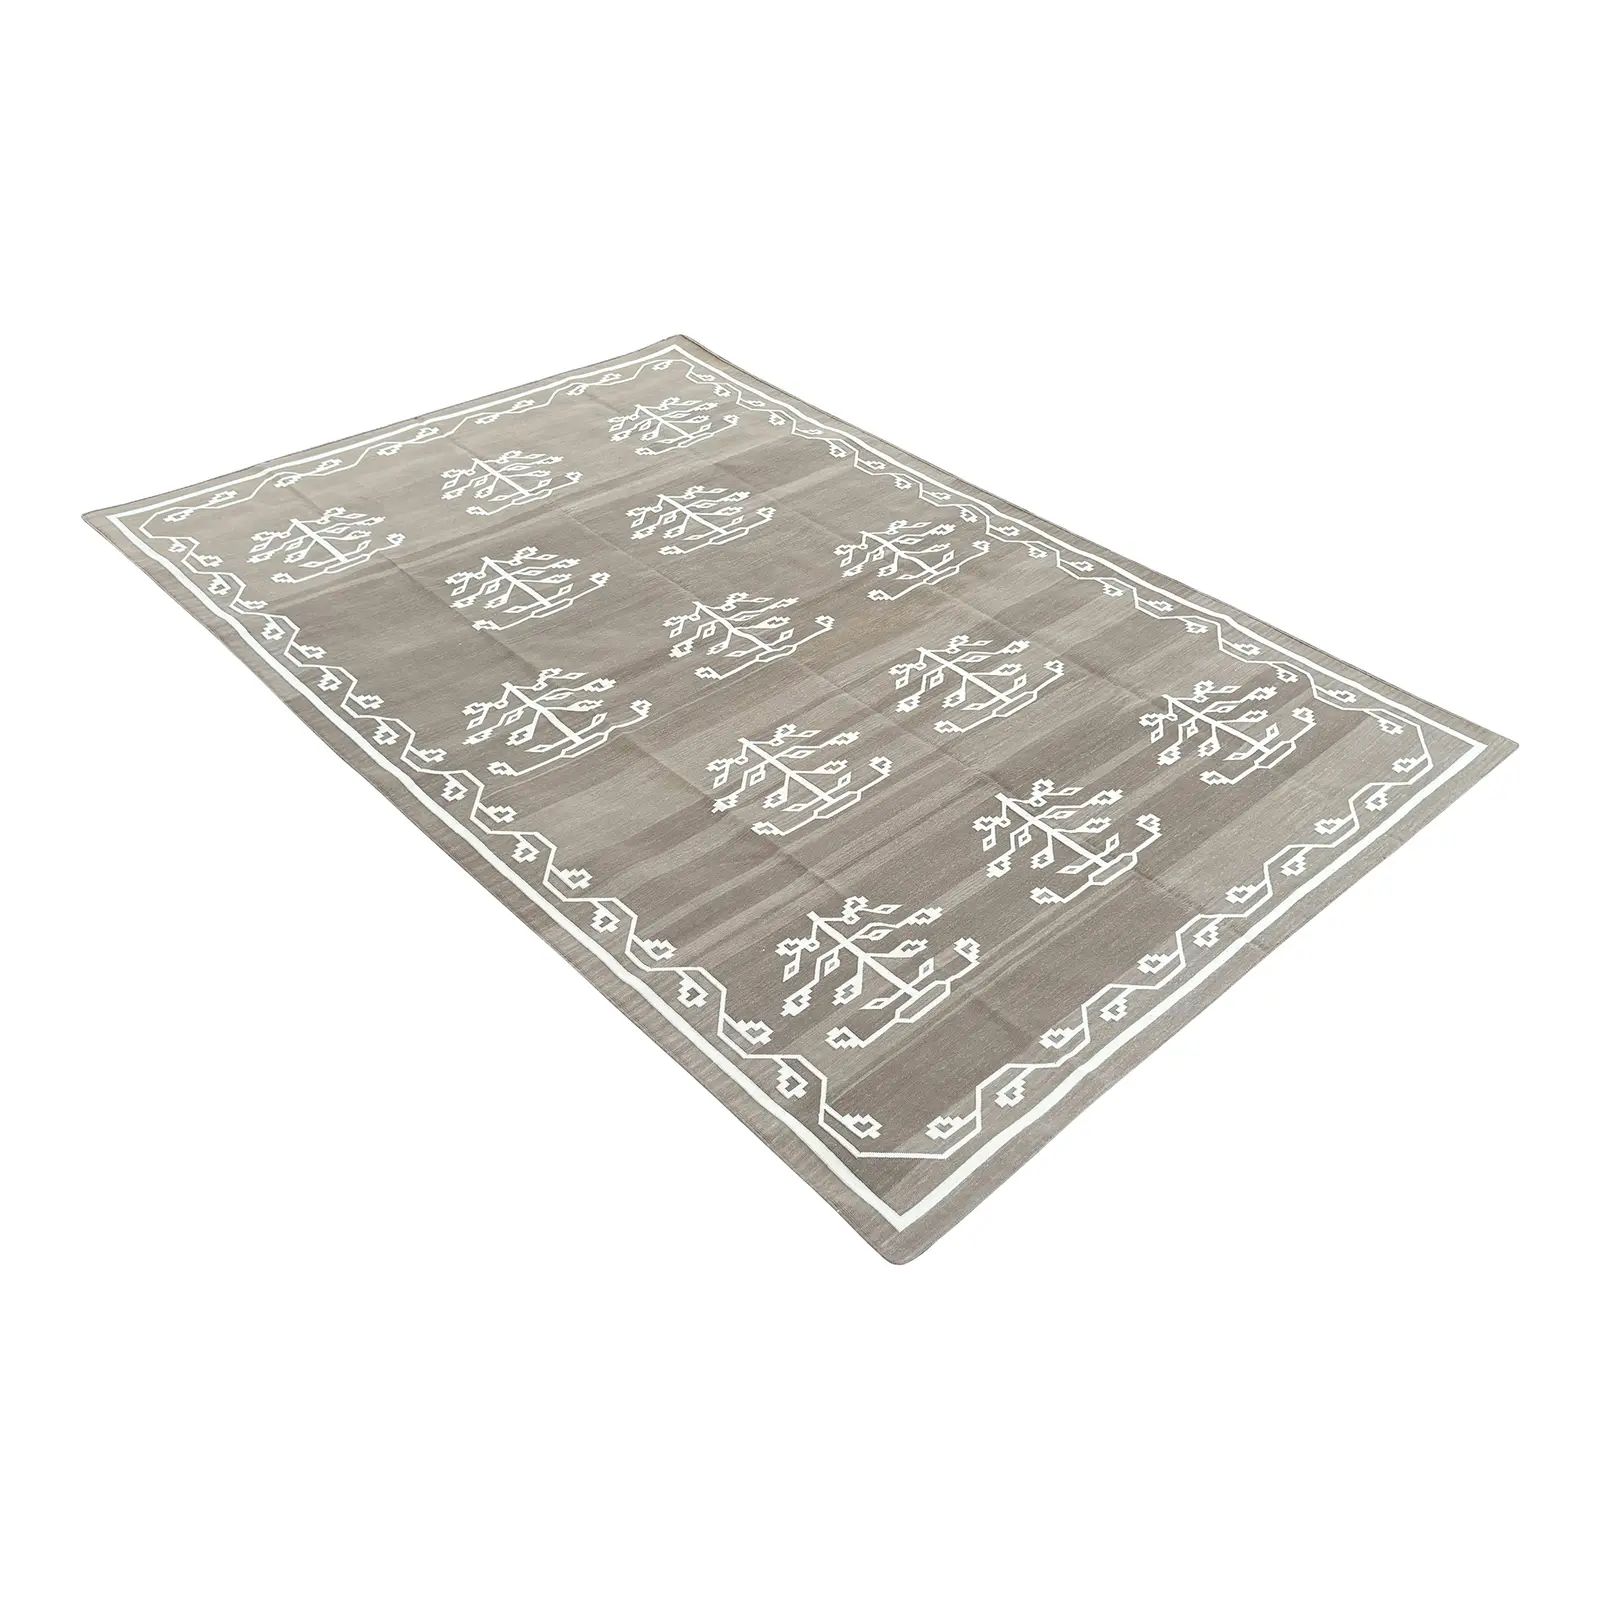 Handmade Cotton Natural Vegetable Dyed, Beige & White Flower / Leaf Patterned Rug/Dhurrie -9'x12' | Chairish